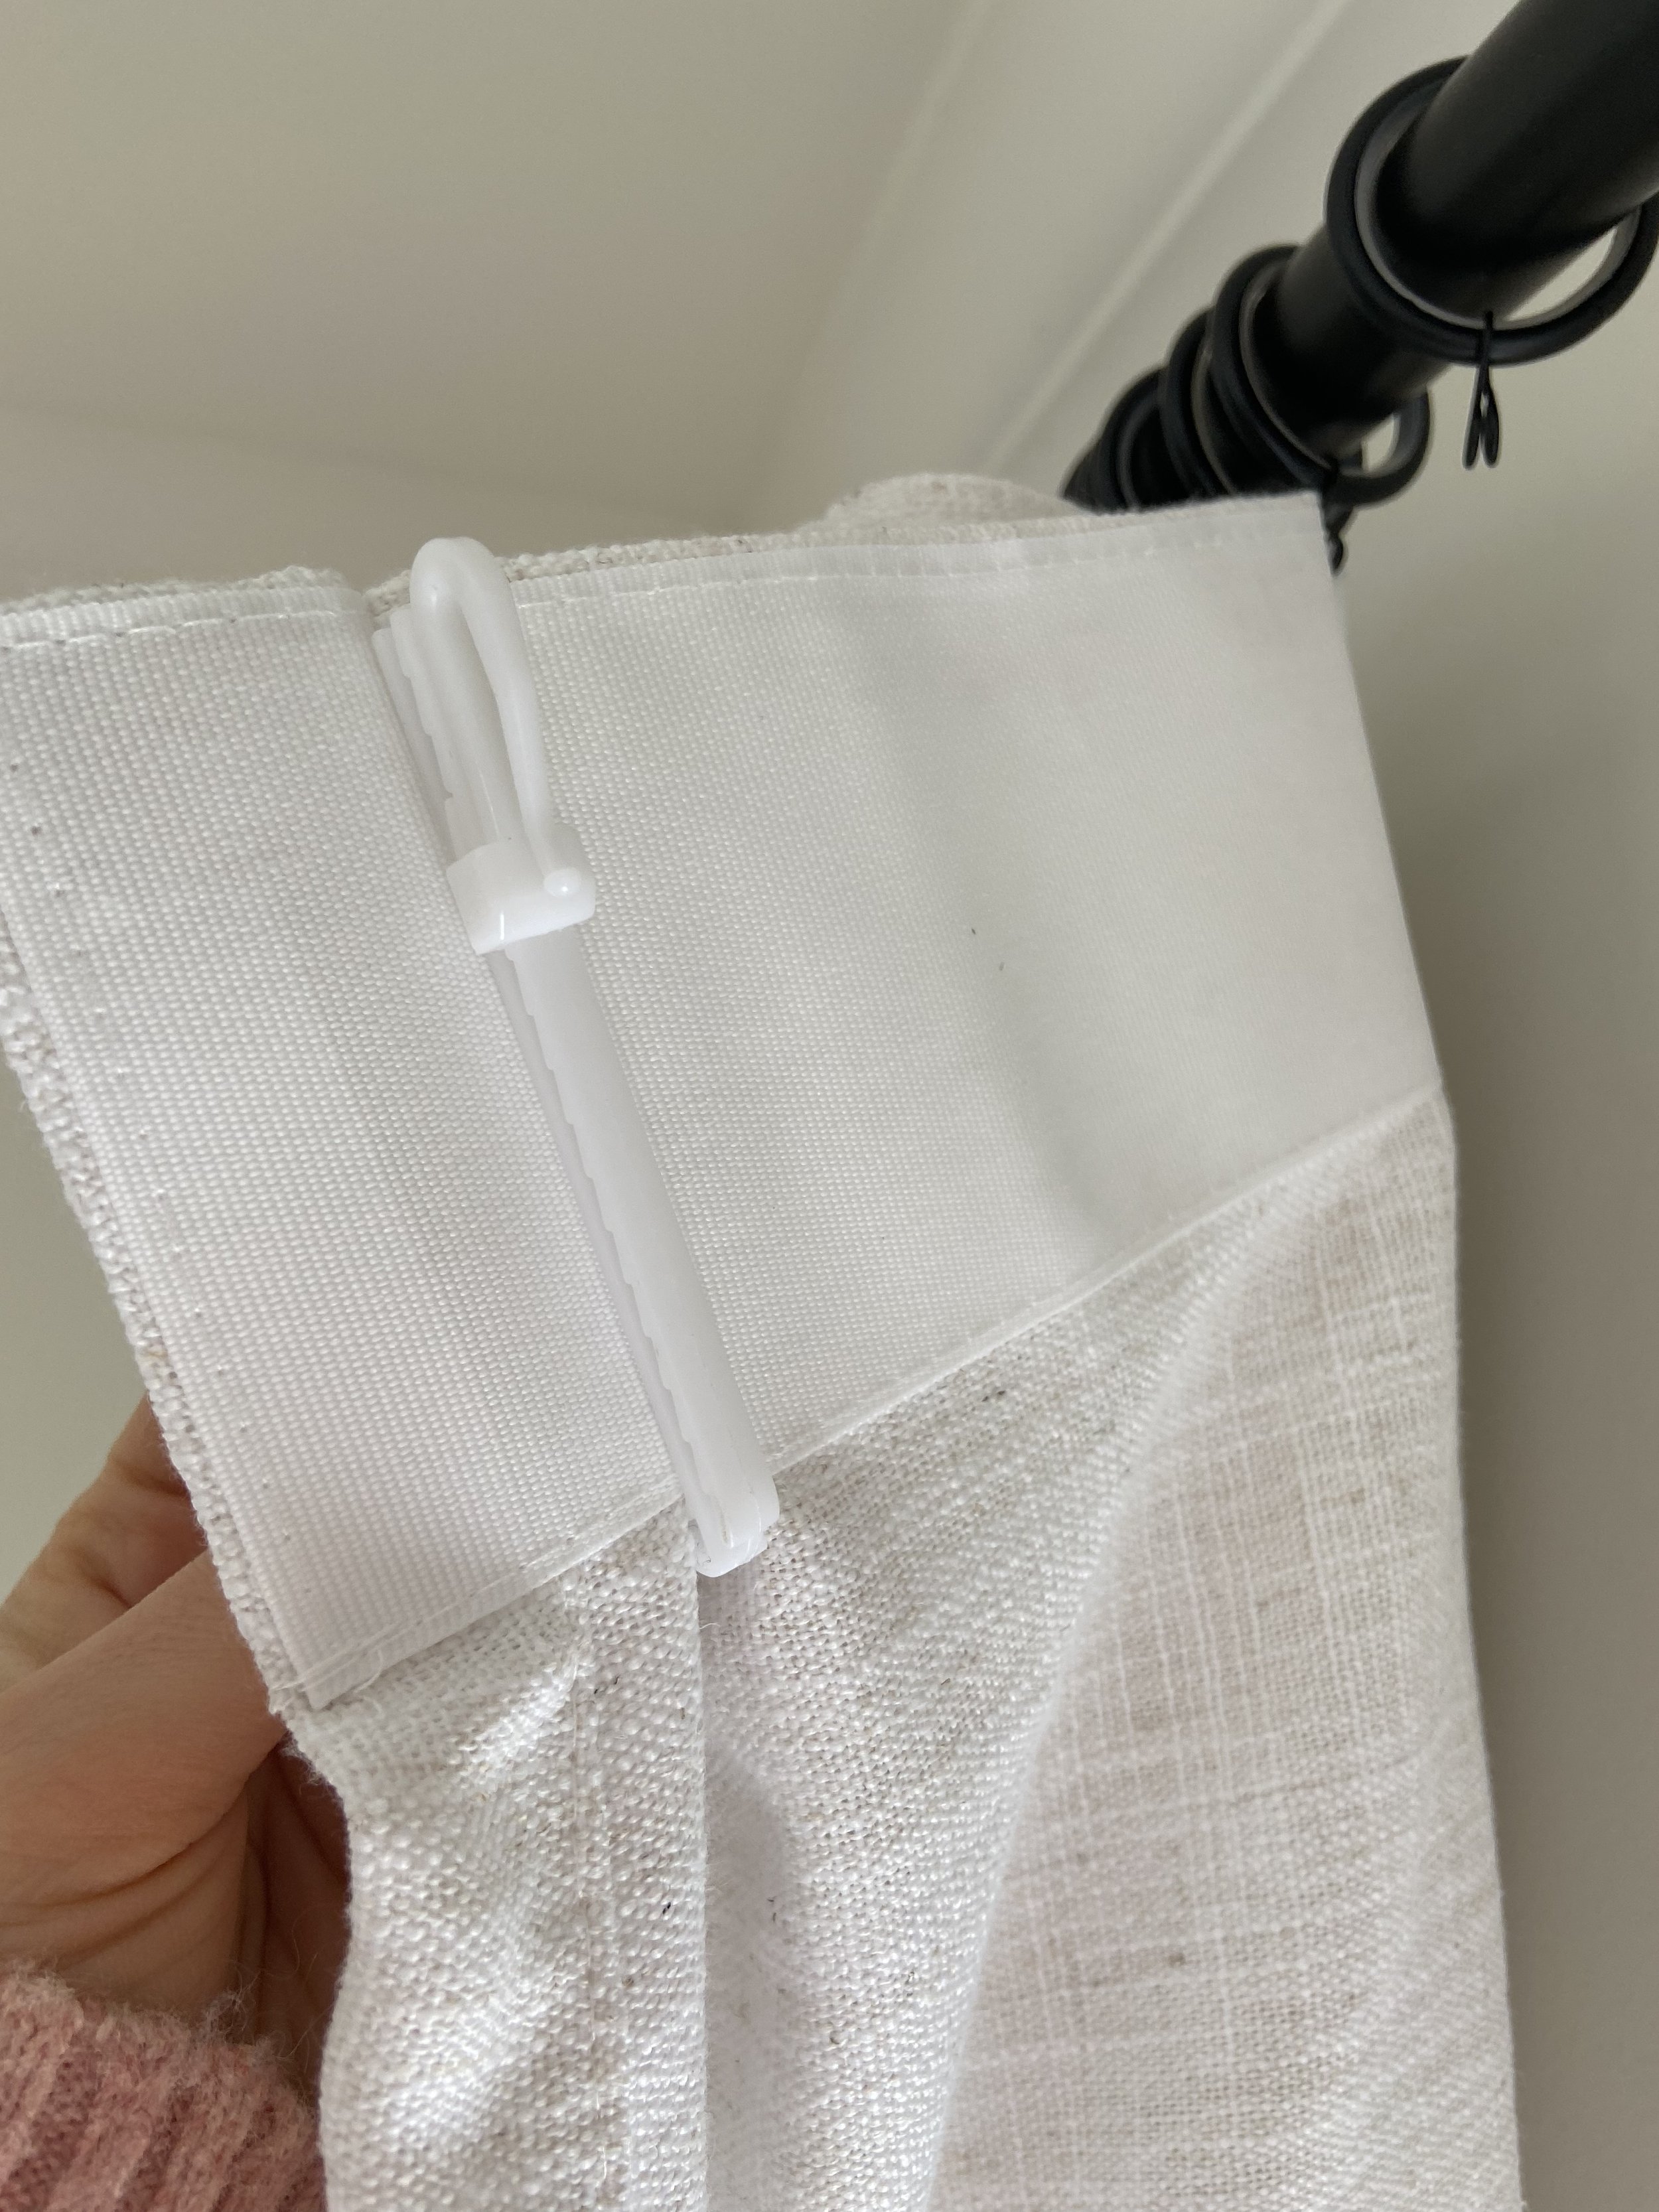 Our Amazon Draperies + Answering all your questions on Window ...